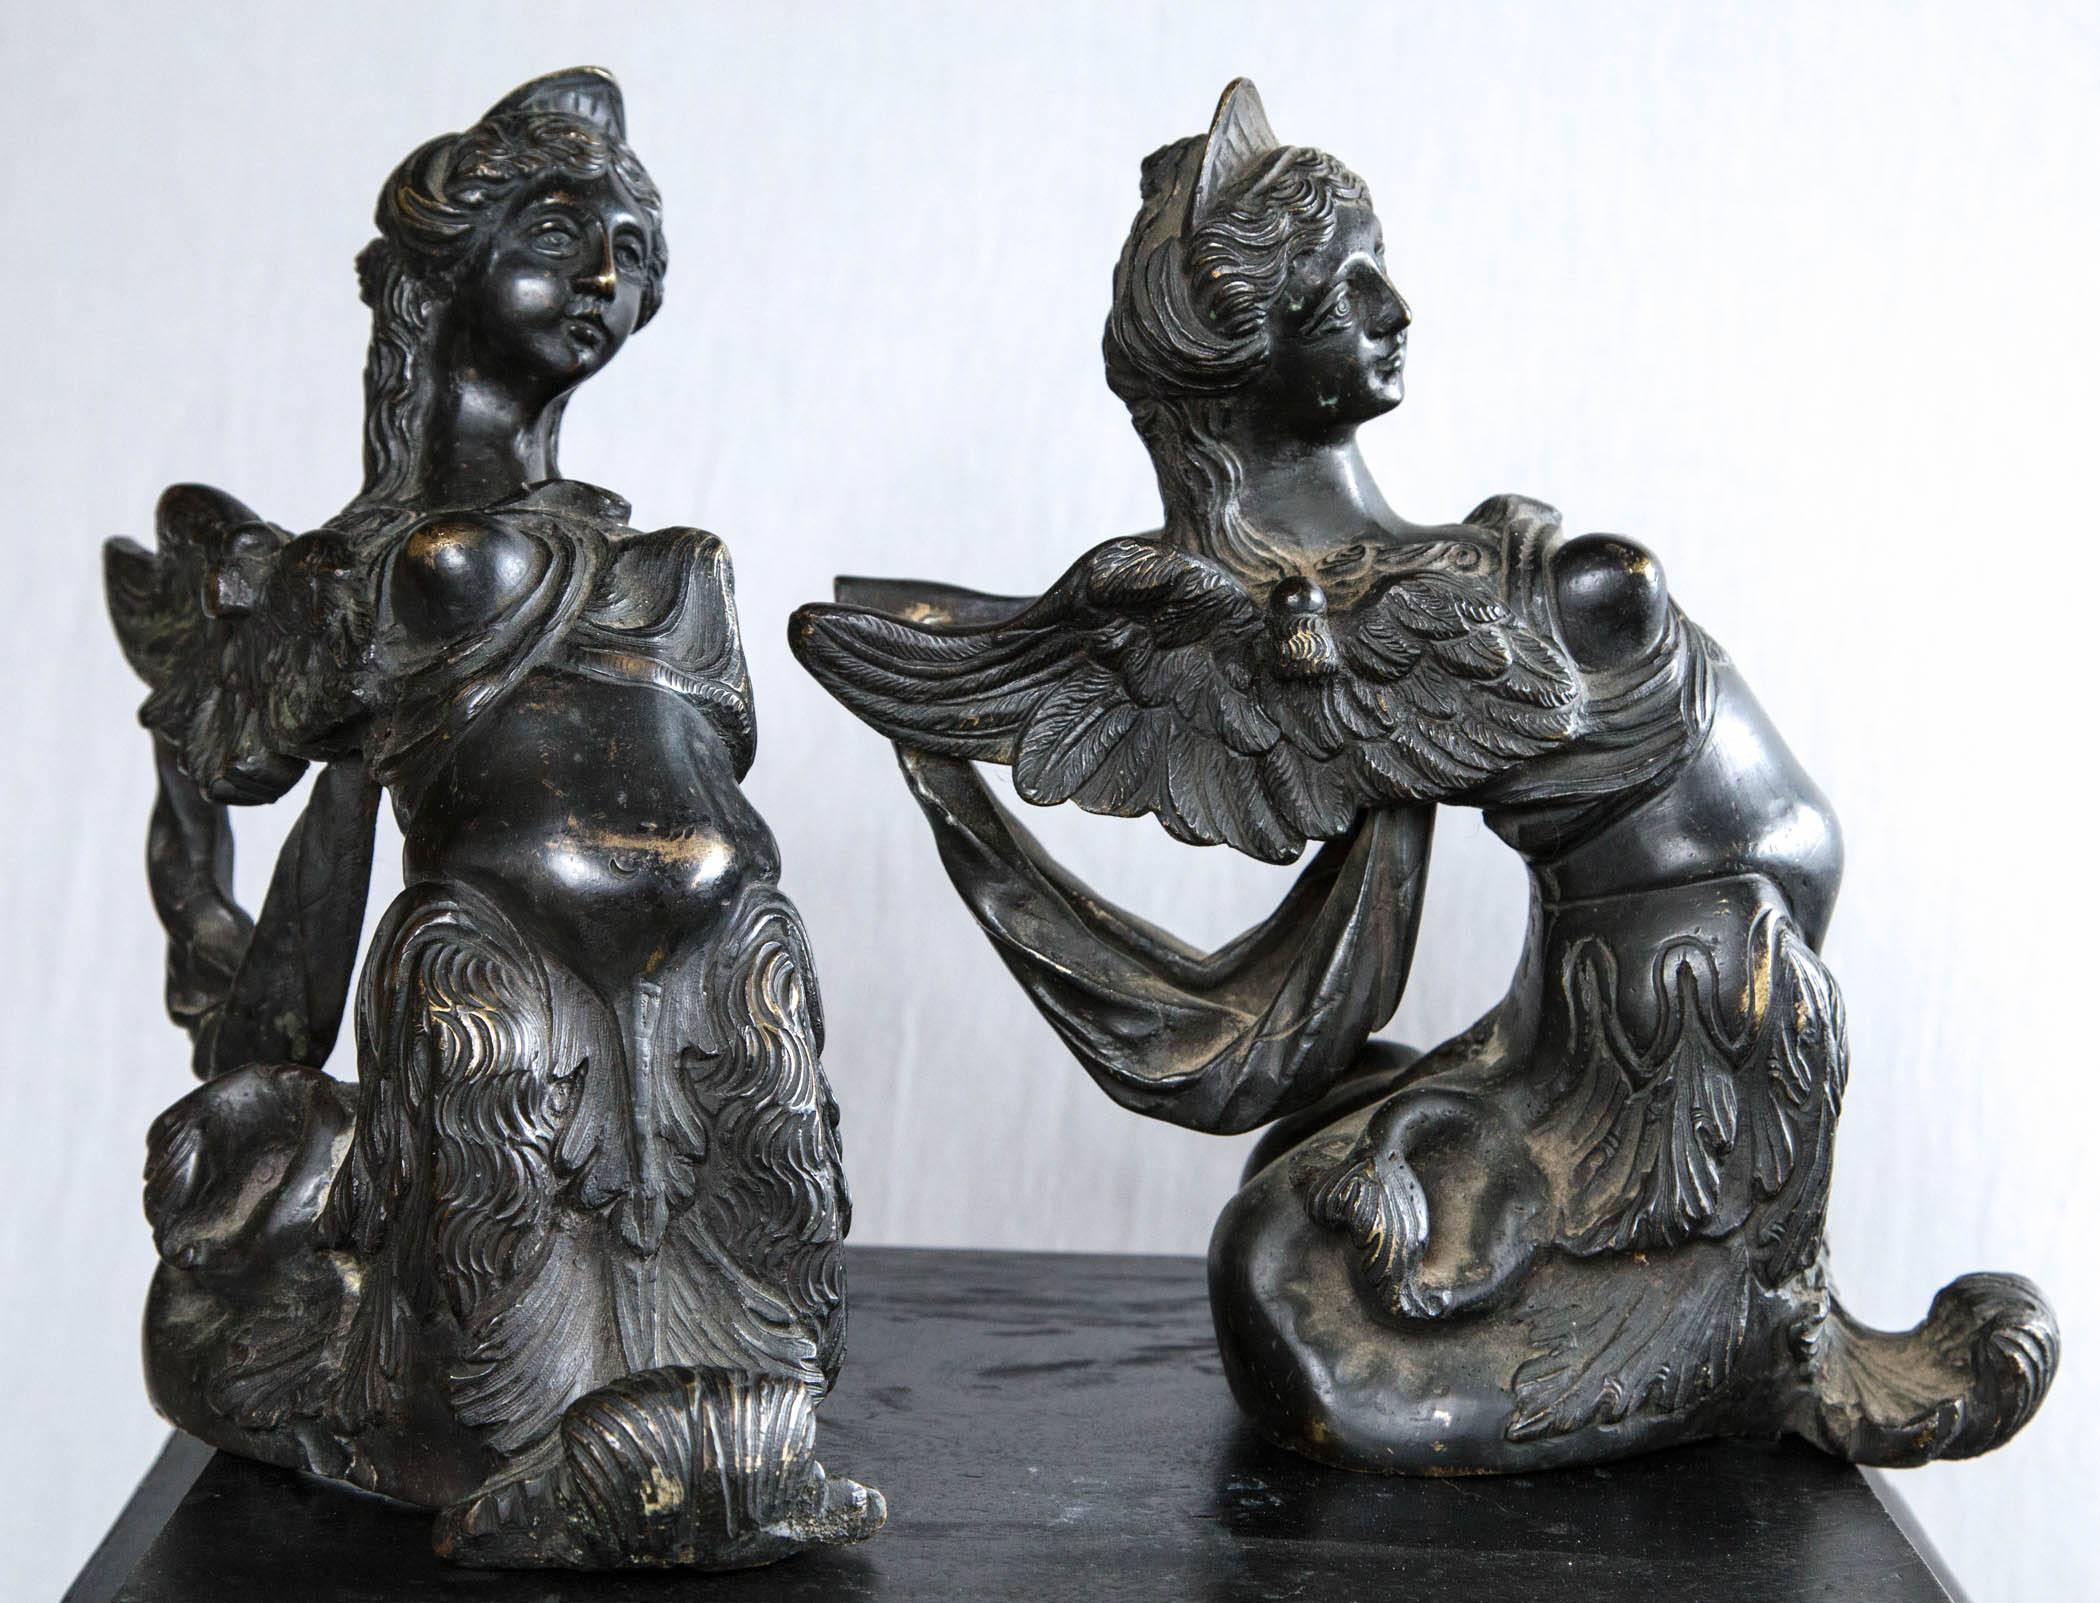 Dating from the 17th century, this pair were once base supports for large candelabra. They have a rich black/brown patina. They have wings and flowing robes with bare breasts. In keeping with the quality of Italian Renaissance bronzes, they are well